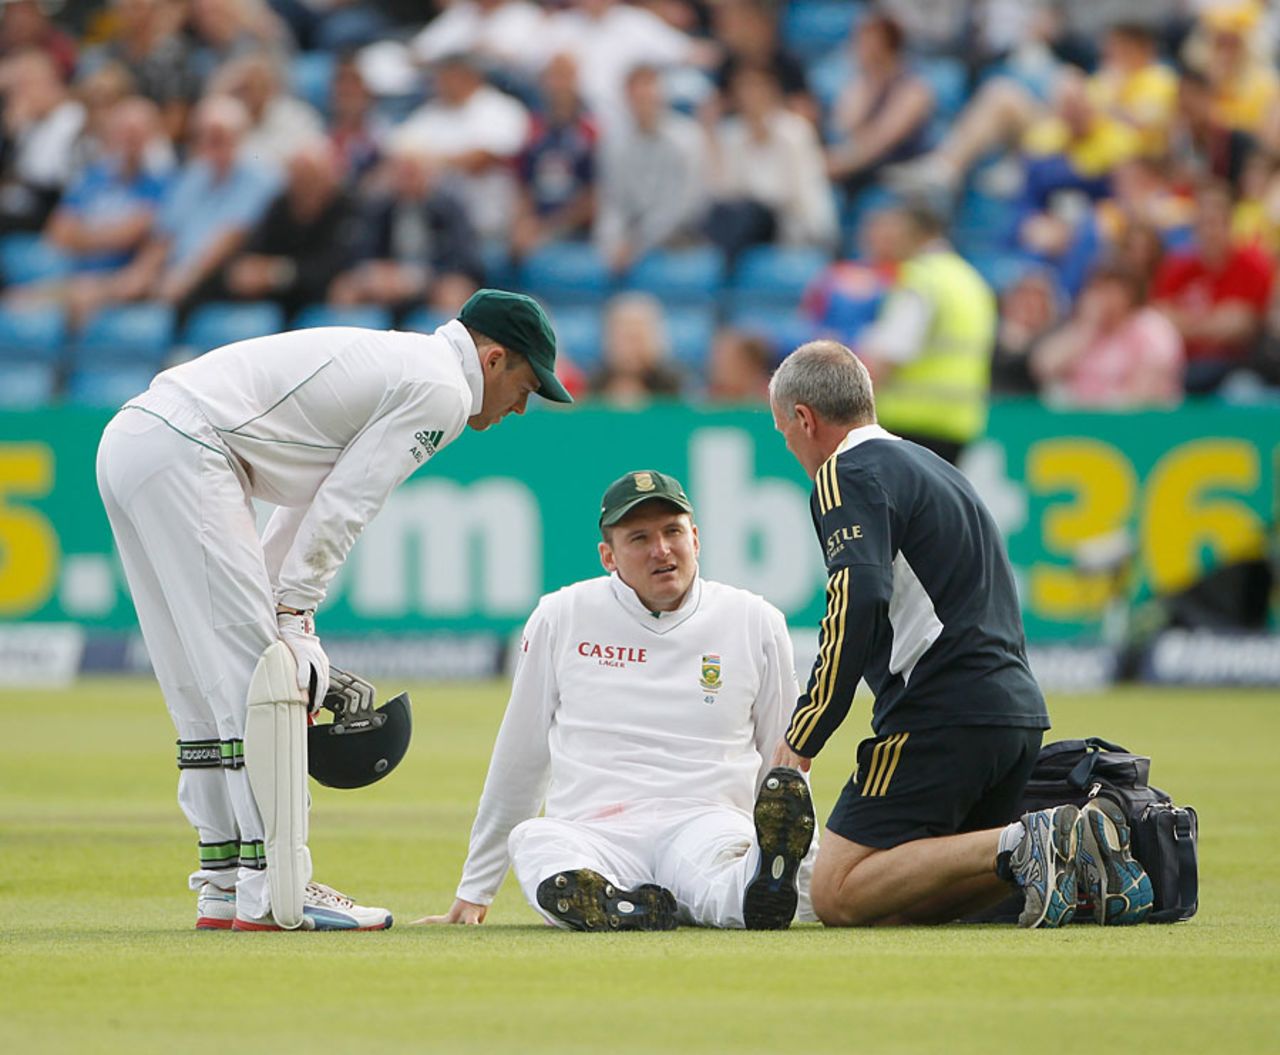 Graeme Smith went down with what looked like a knee injury, England v South Africa, 2nd Investec Test, Headingley, 3rd day, August 4, 2012